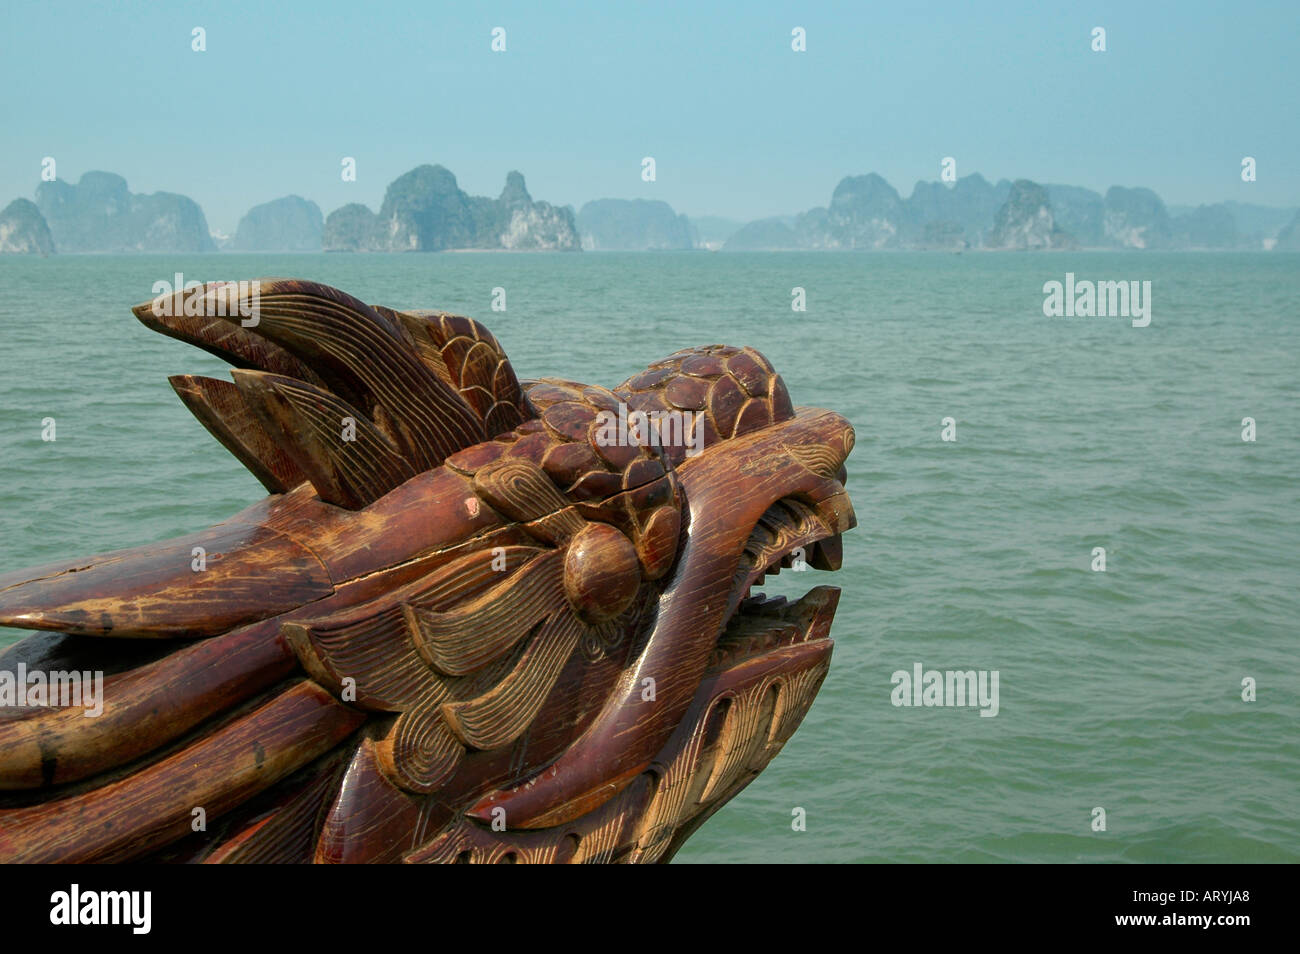 A wooden dragon prow looking at the Halong Bay with its 3000 islands and islets of carboniferous chalk. Stock Photo